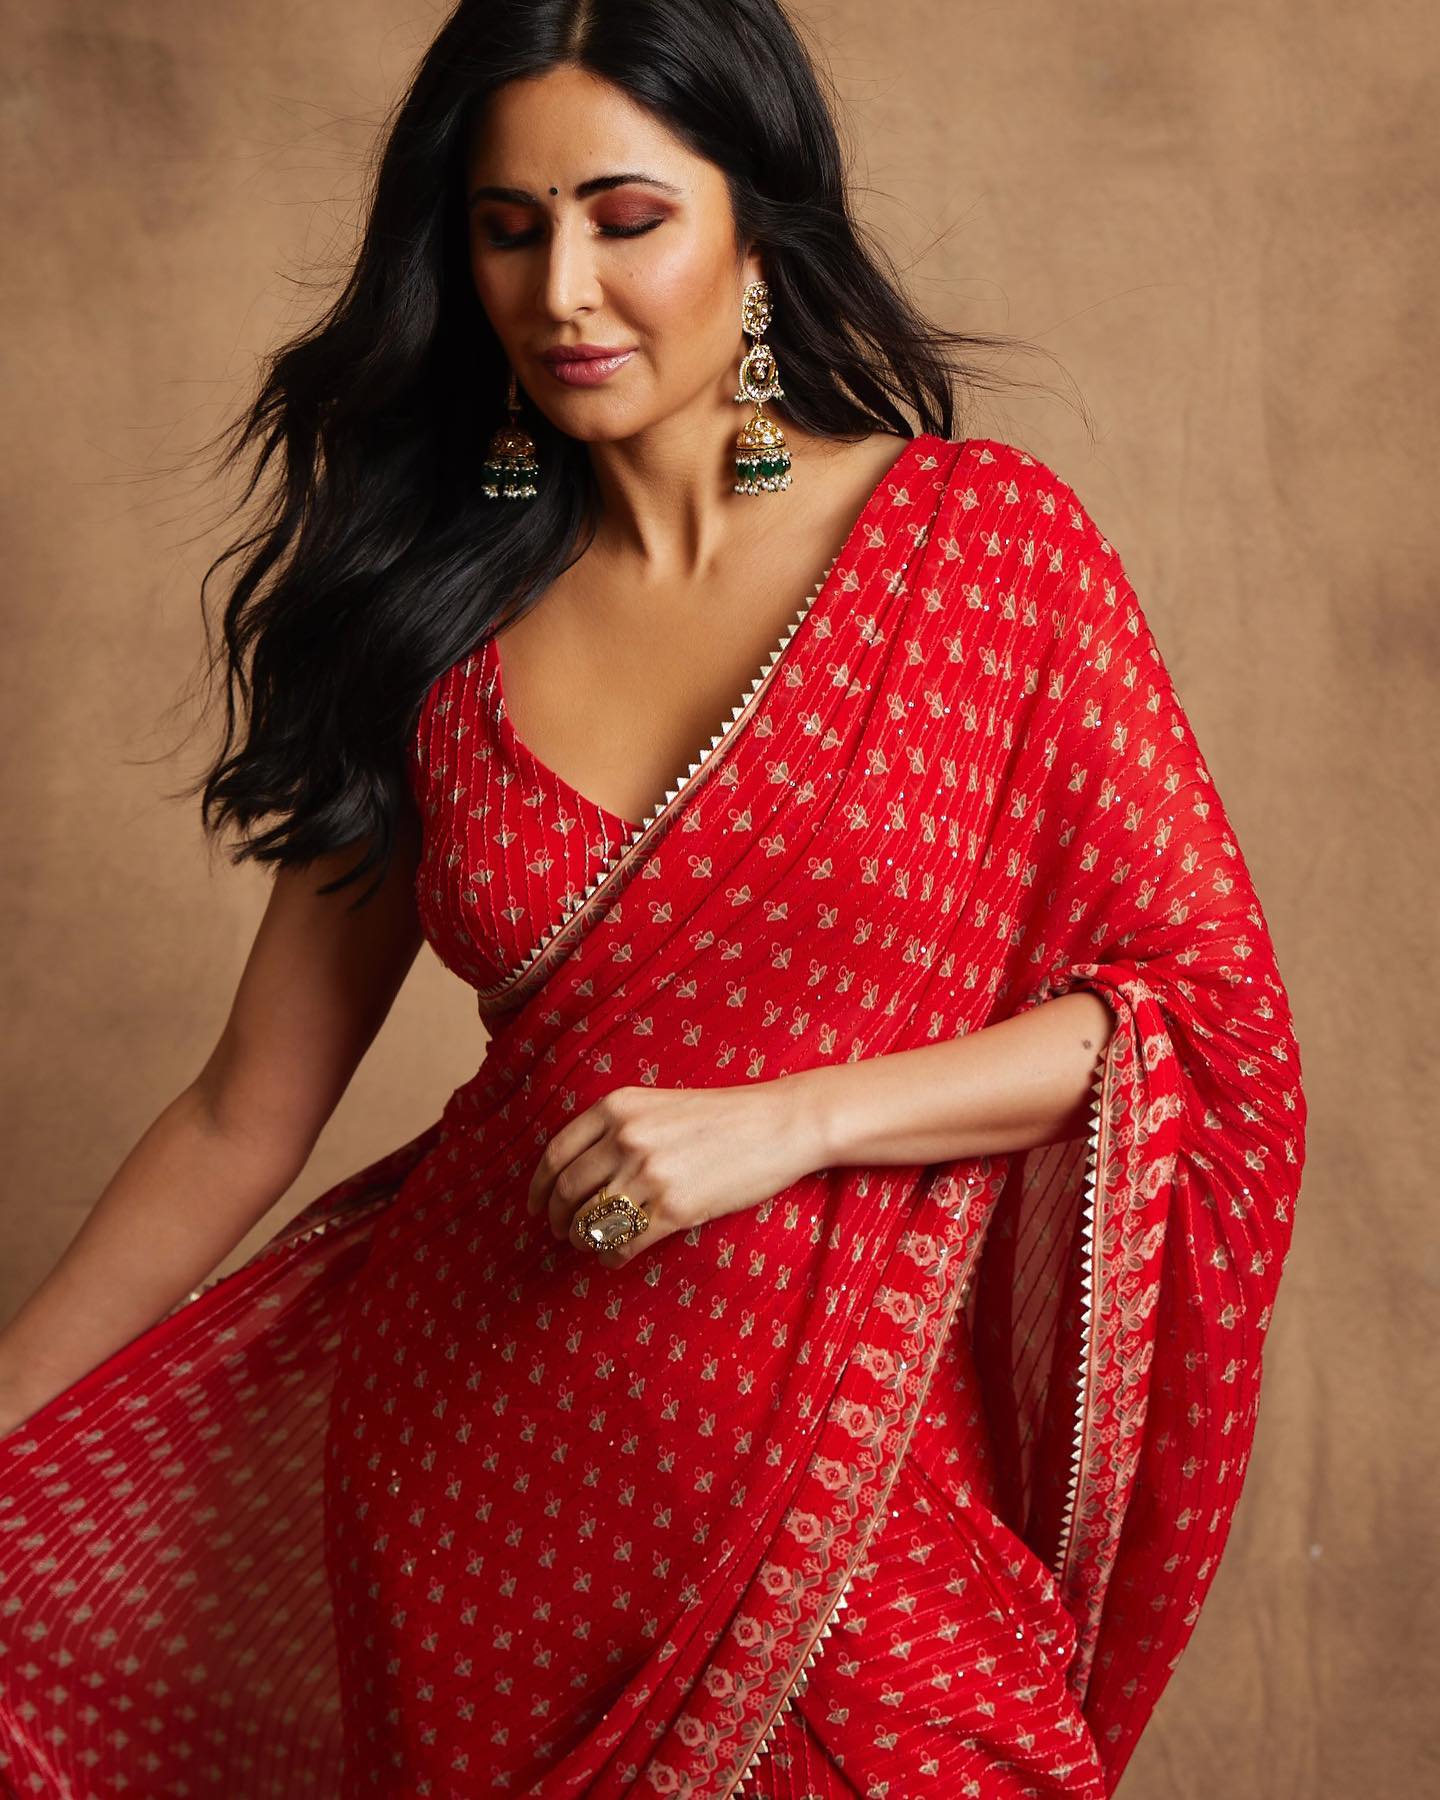 Is Katrina Kaif Ready For the Cannes Red Carpet? - Masala